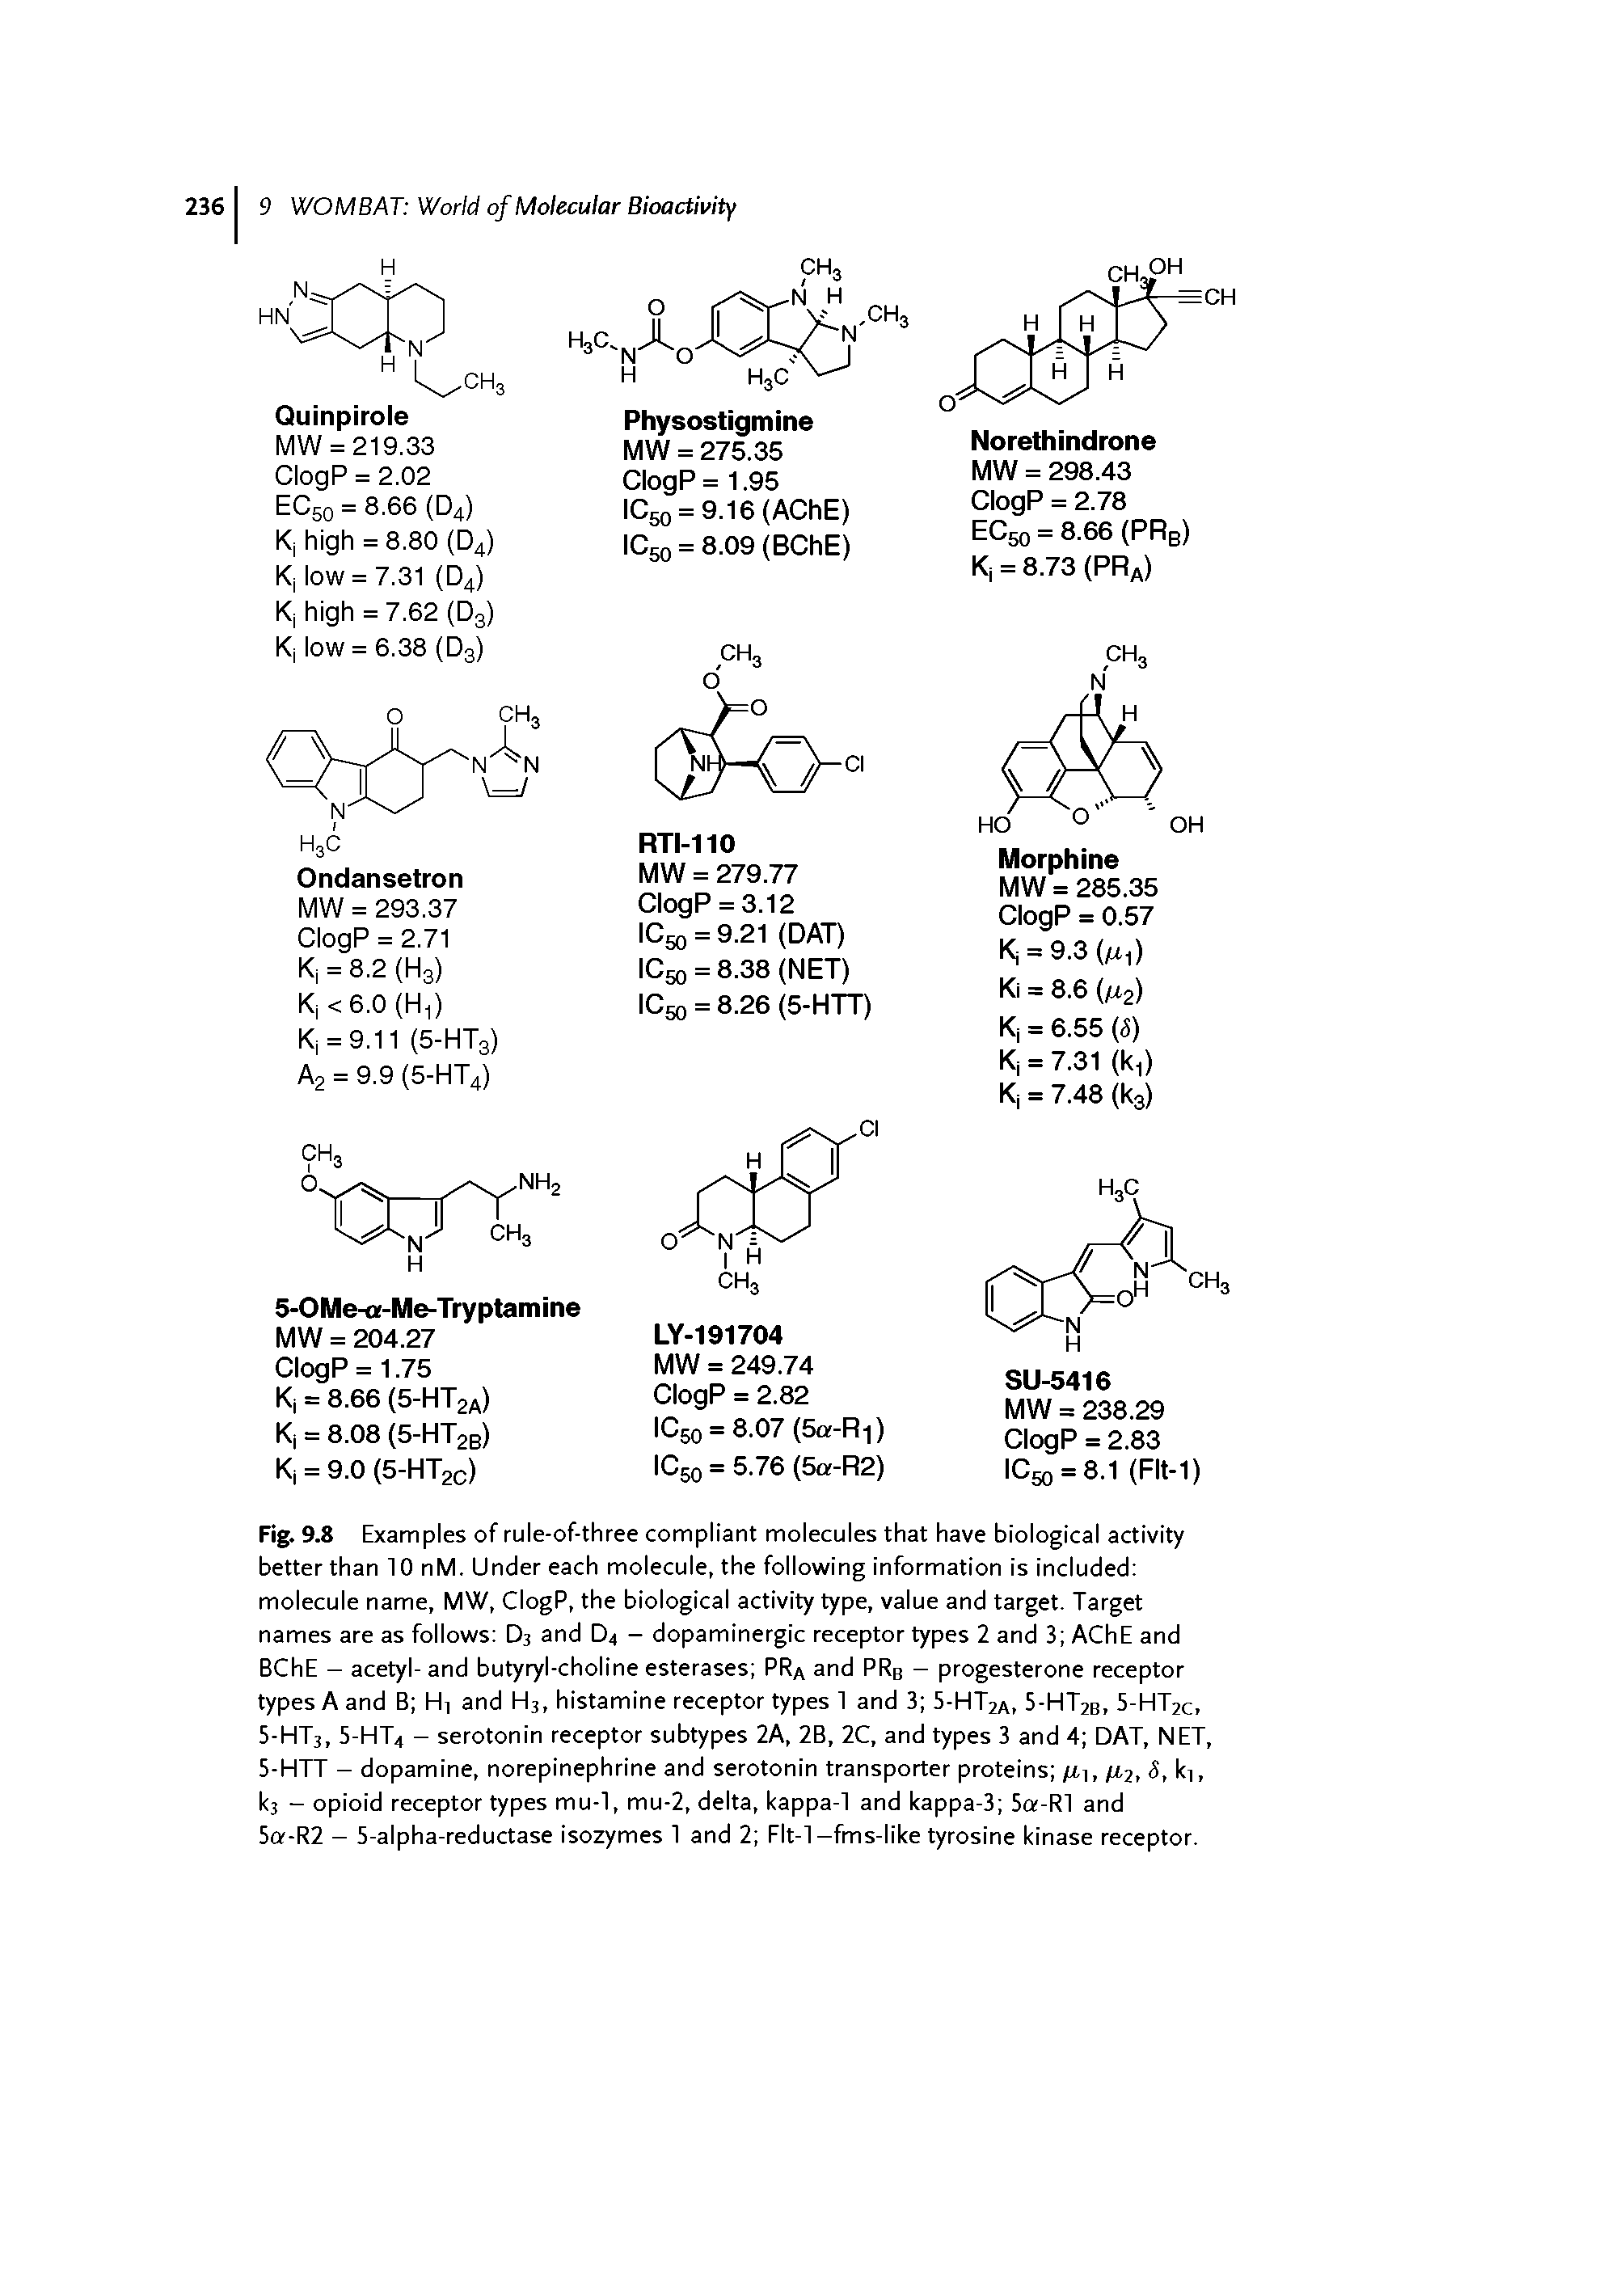 Fig. 9.8 Examples of rule-of-three compliant molecules that have biological activity better than 10 nM. Under each molecule, the following information is included molecule name, MW, ClogP, the biological activity type, value and target. Target names are as follows D3 and D4 - dopaminergic receptor types 2 and 3 AChE and BChE - acetyl- and butyryl-choline esterases PRa and PRb - progesterone receptor types A and B H] and H3, histamine receptor types 1 and 3 5-HT2a, 5-HT2b, 5-HT2c, 5-HT3, 5-HT4 - serotonin receptor subtypes 2A, 2B, 2C, and types 3 and 4 DAT, NET, 5-HTT - dopamine, norepinephrine and serotonin transporter proteins /X], /x.2, S, ki, ks - opioid receptor types mu-1, mu-2, delta, kappa-1 and kappa-3 5a-Rl and 5o -R2 - 5-alpha-reductase isozymes 1 and 2 Flt-1-fms-like tyrosine kinase receptor.